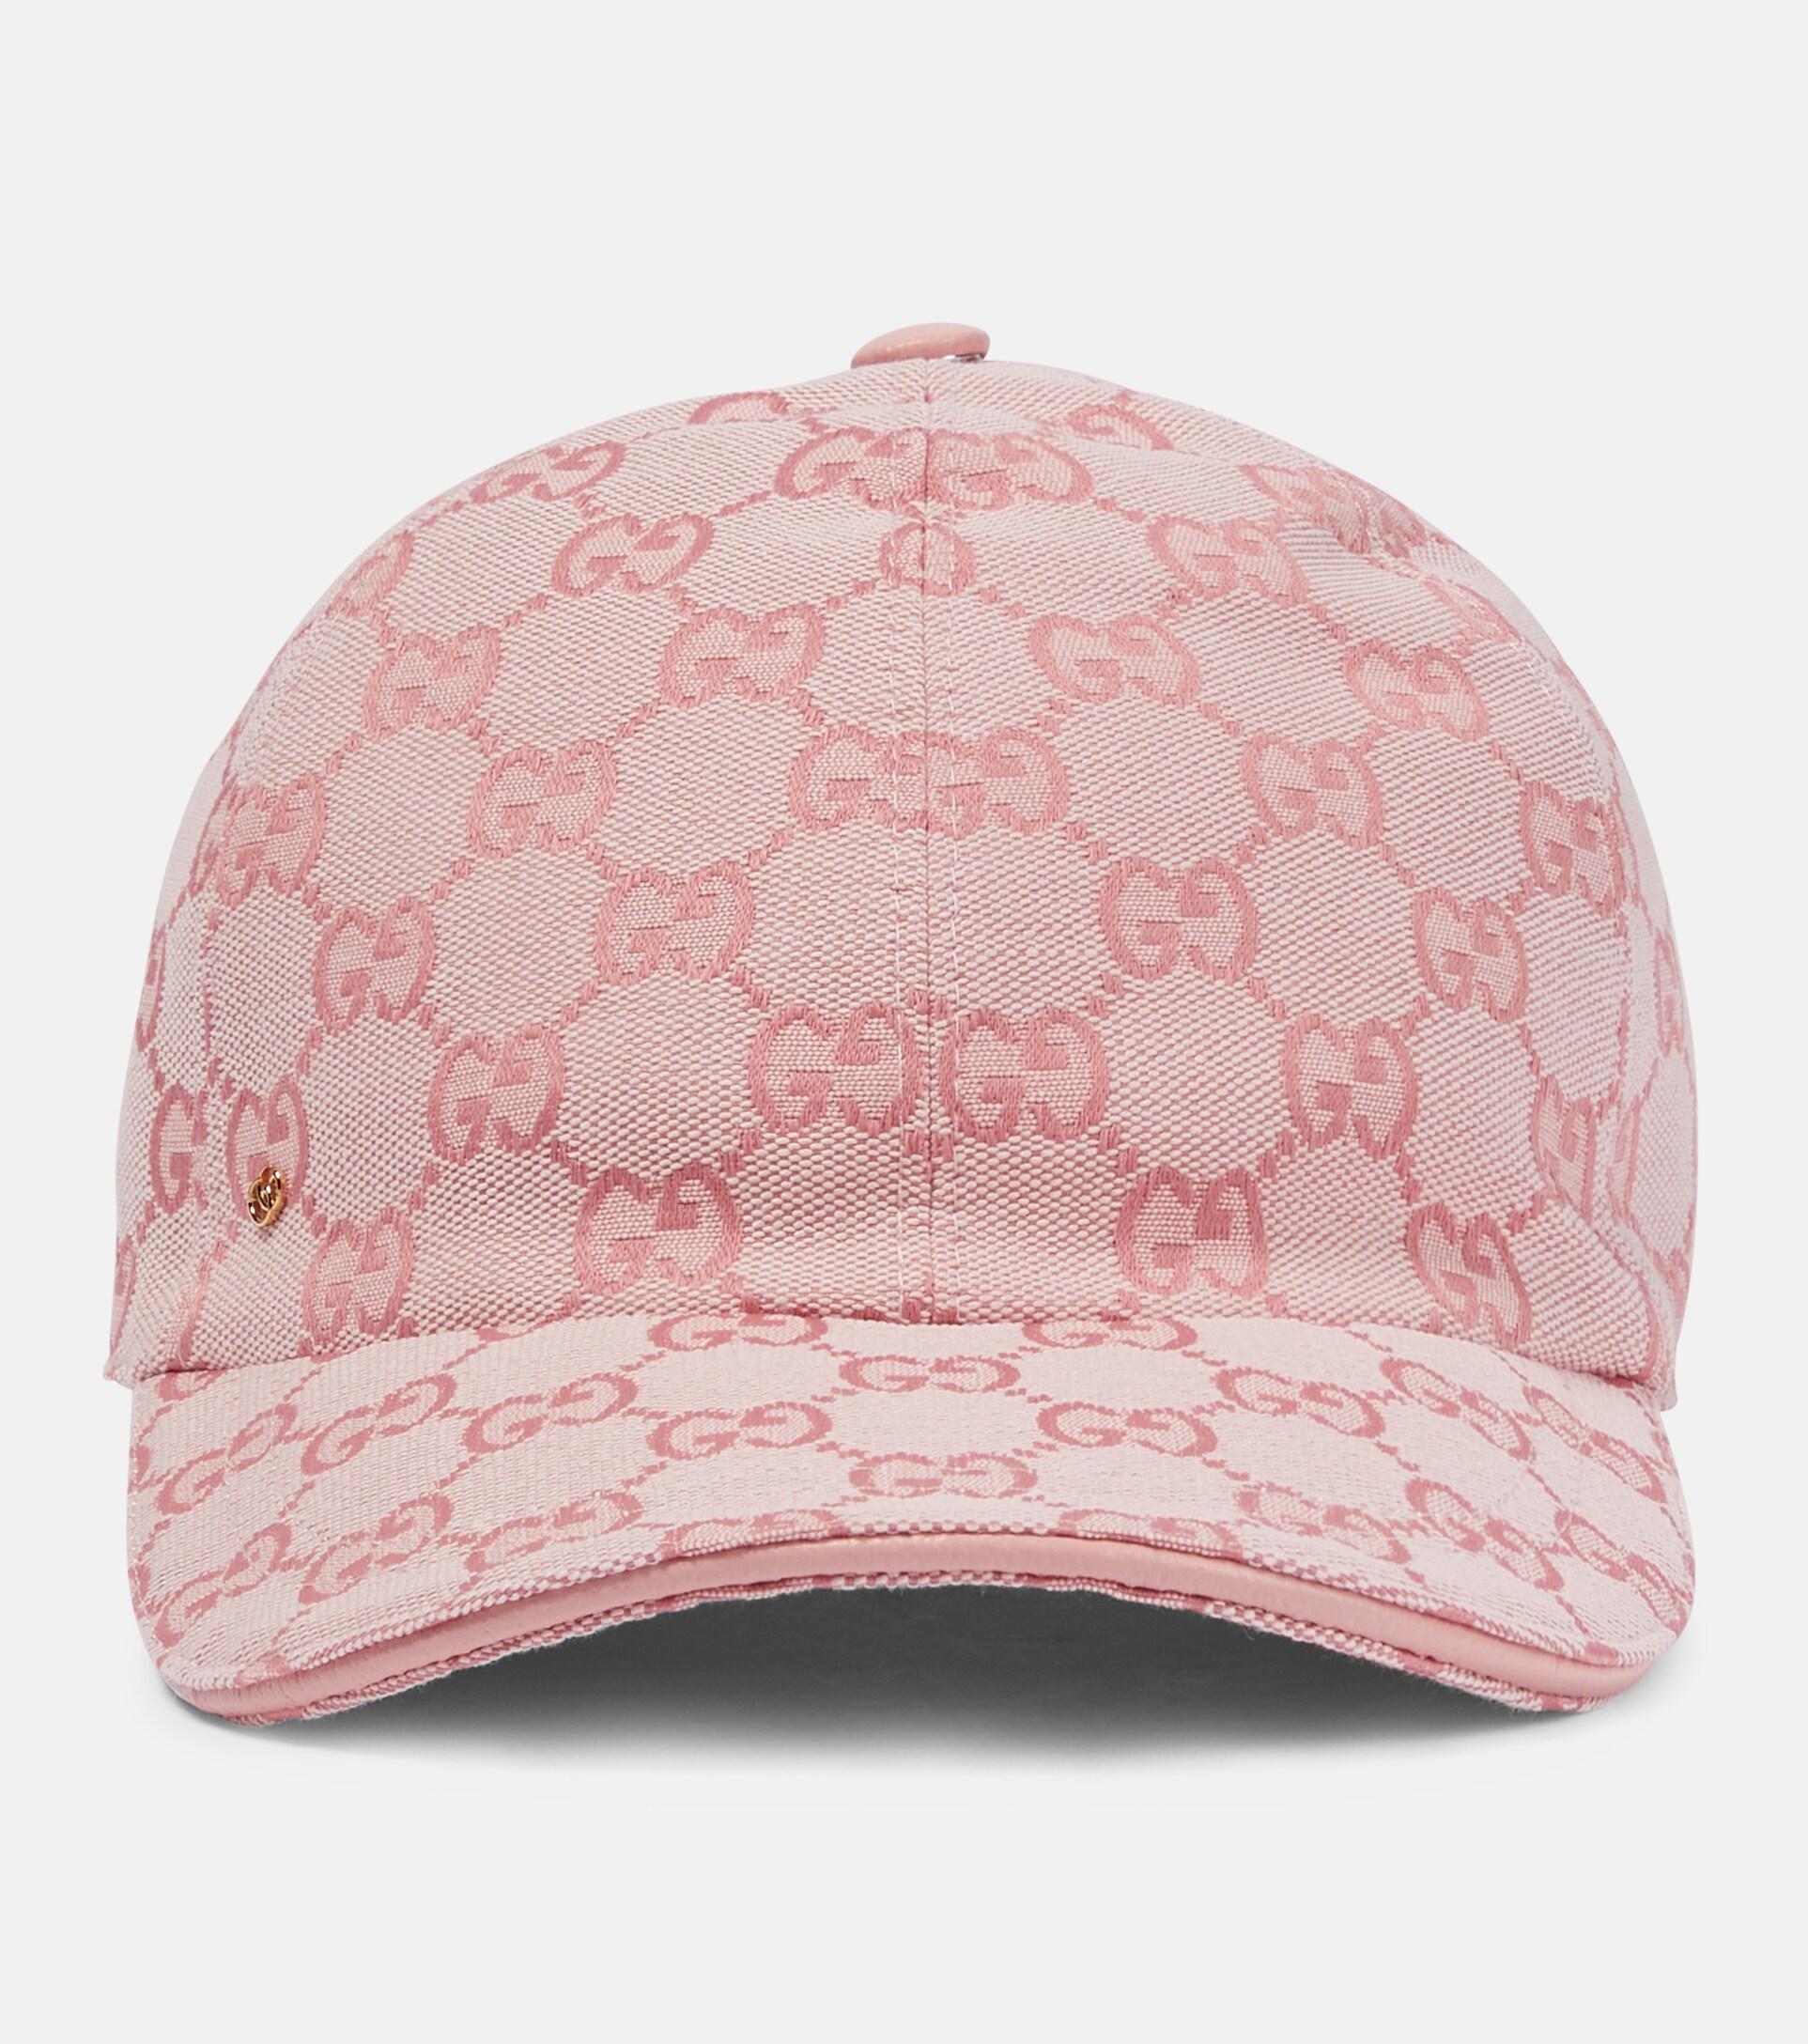 Gucci GG Supreme Canvas Baseball Cap in Pink | Lyst